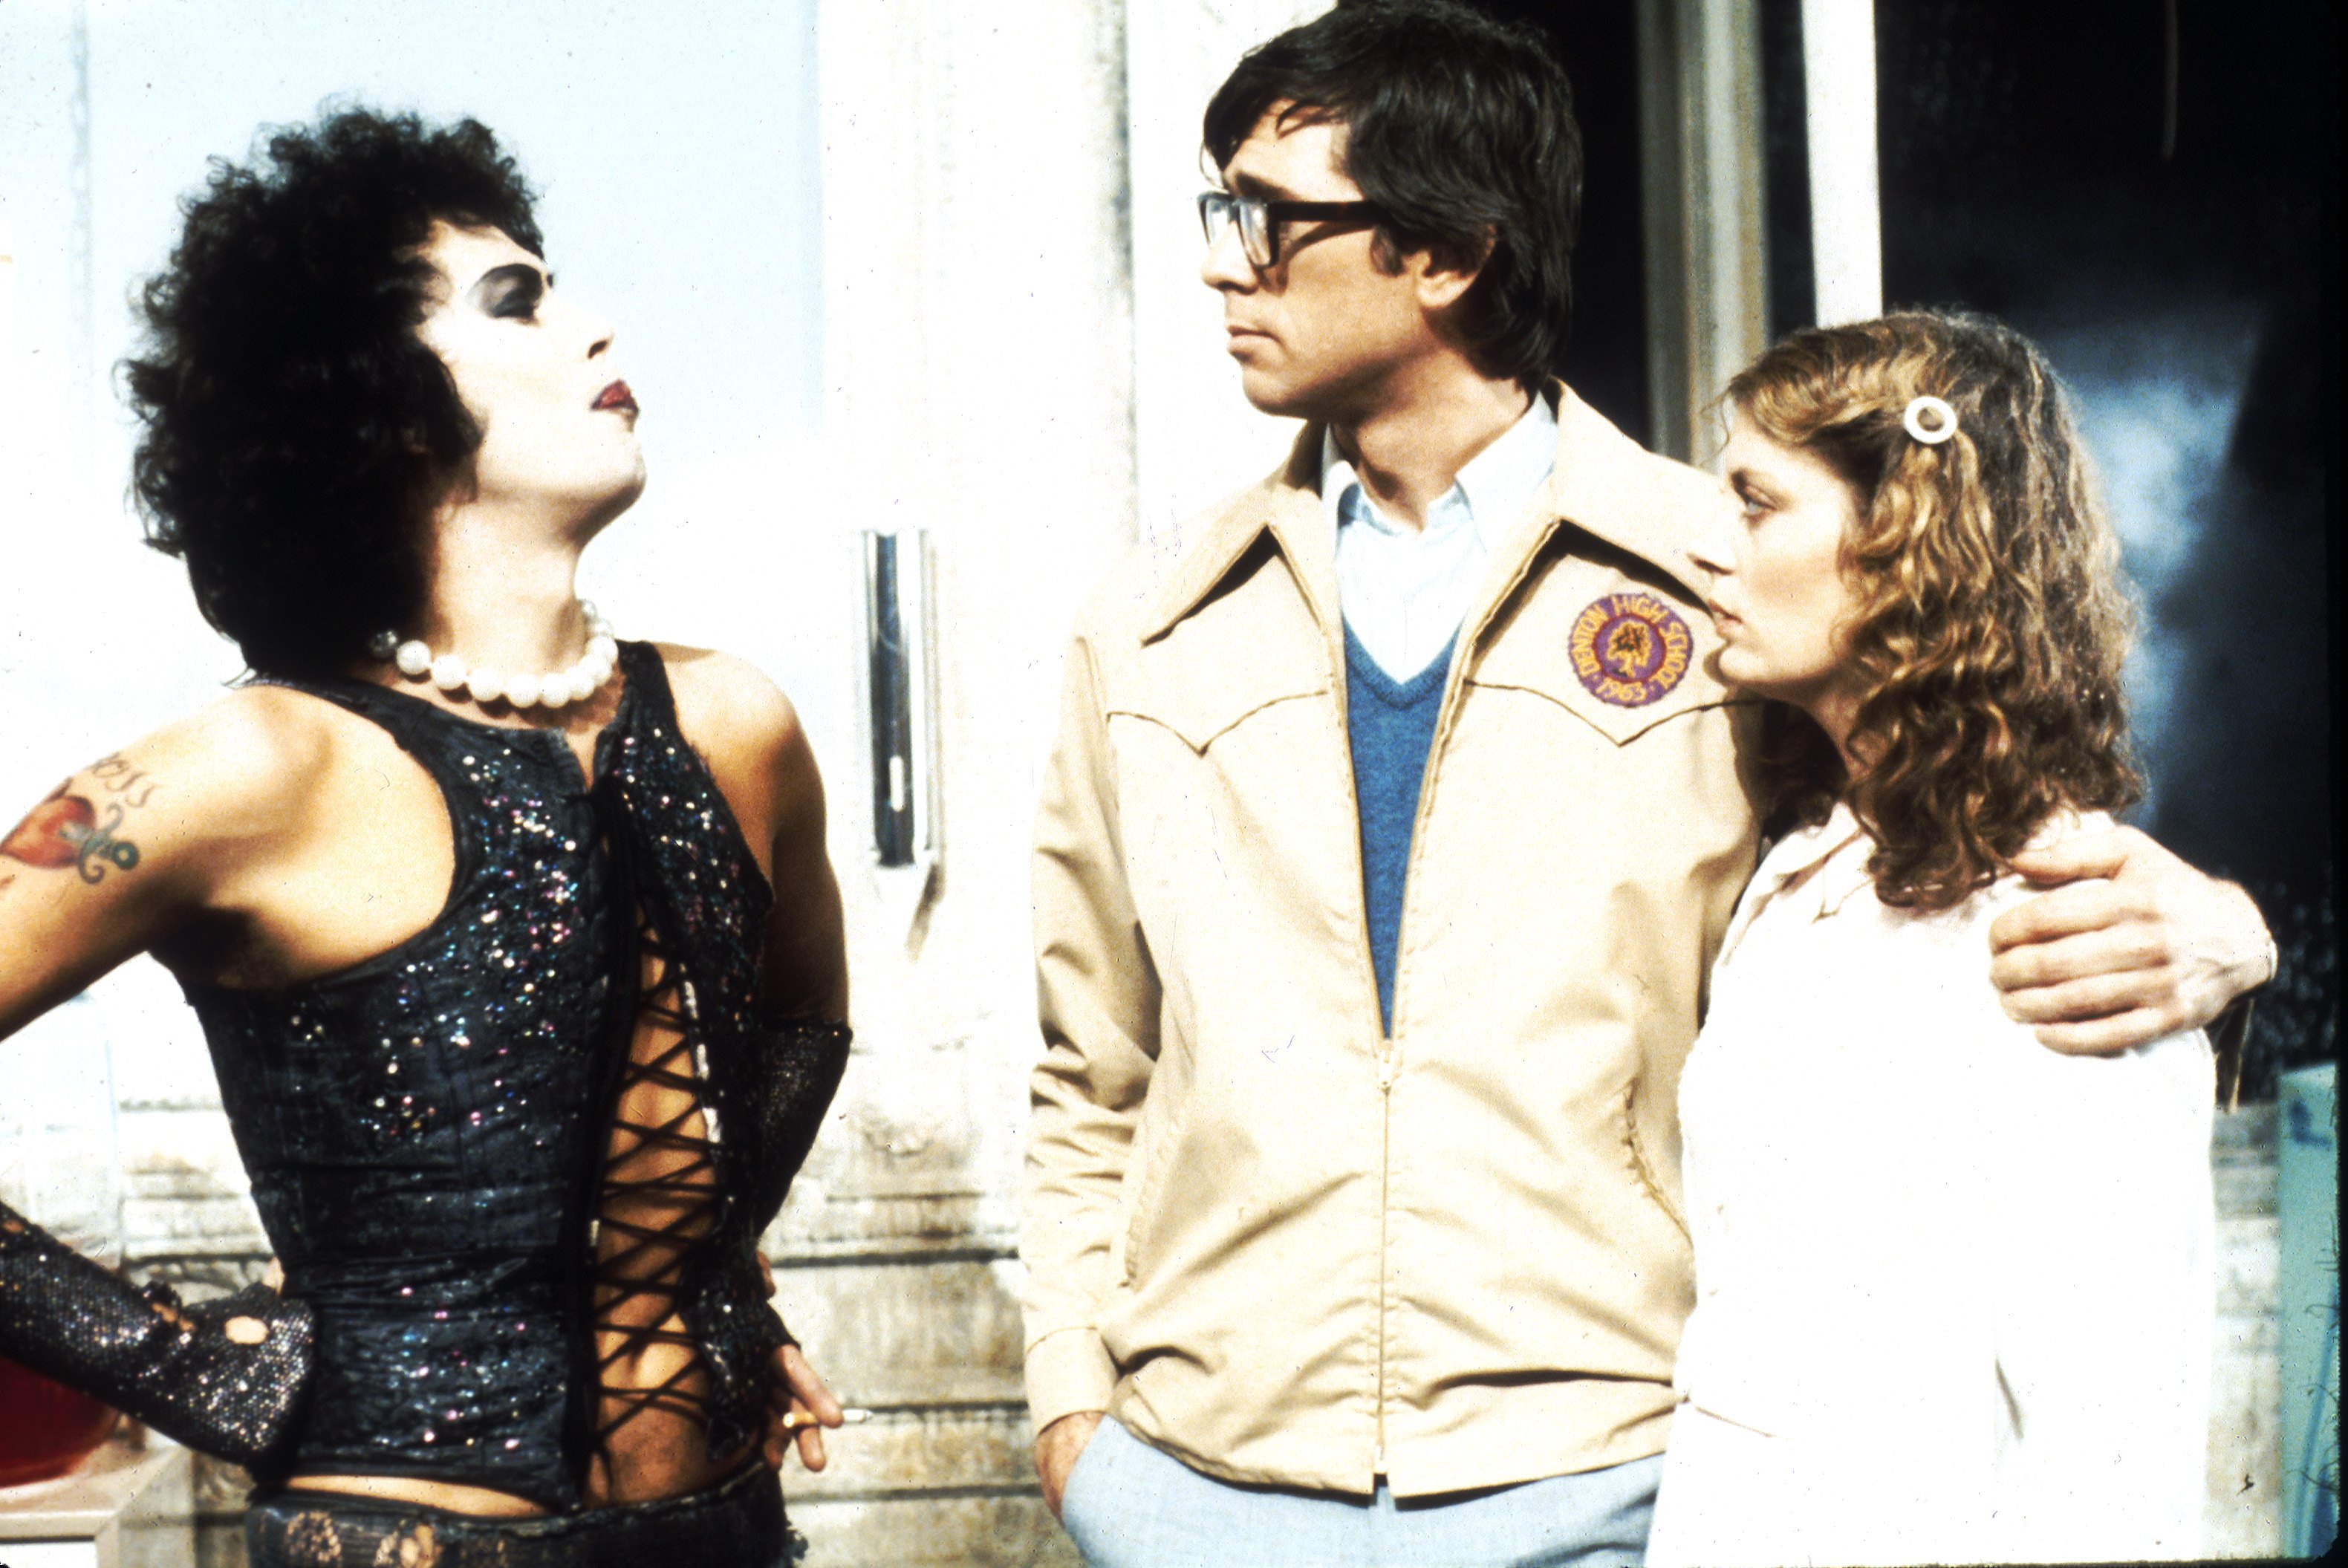 We'll Meet Again: Watching Rocky Horror in the 2020s, Features